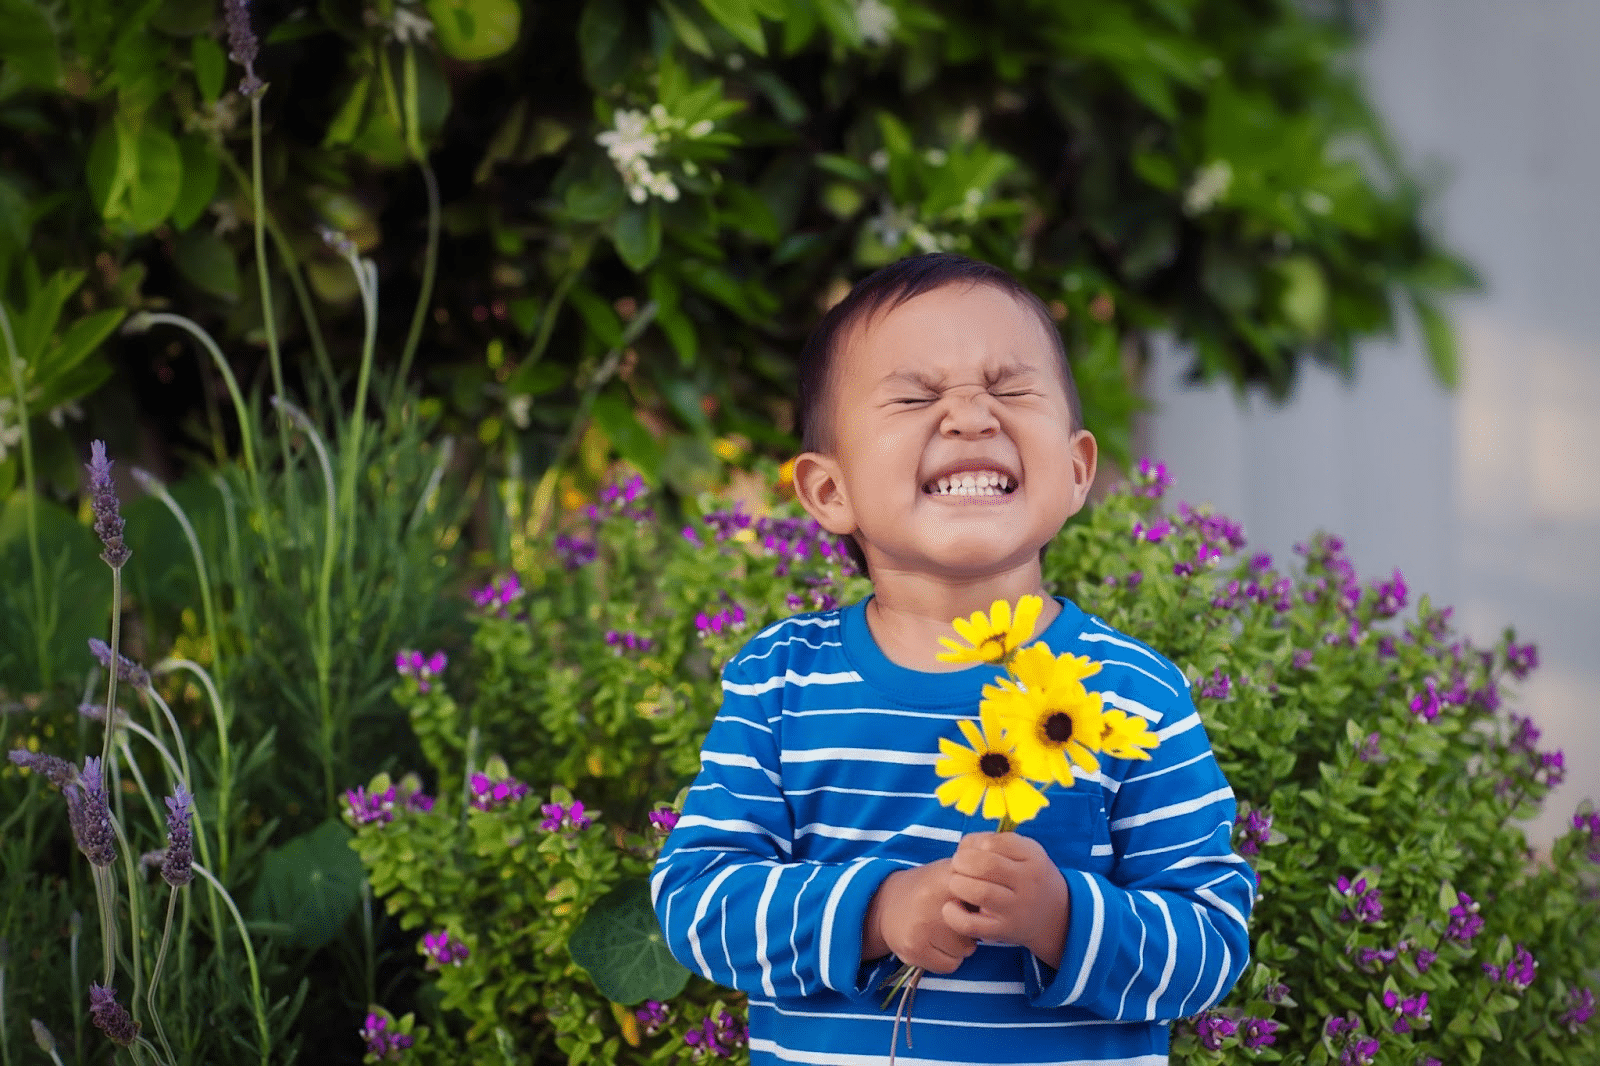 Cute little boy in blue and white striped shirt flashes a big cheesy grin while holding yellow daisies. Other flowers can be seen in the background.